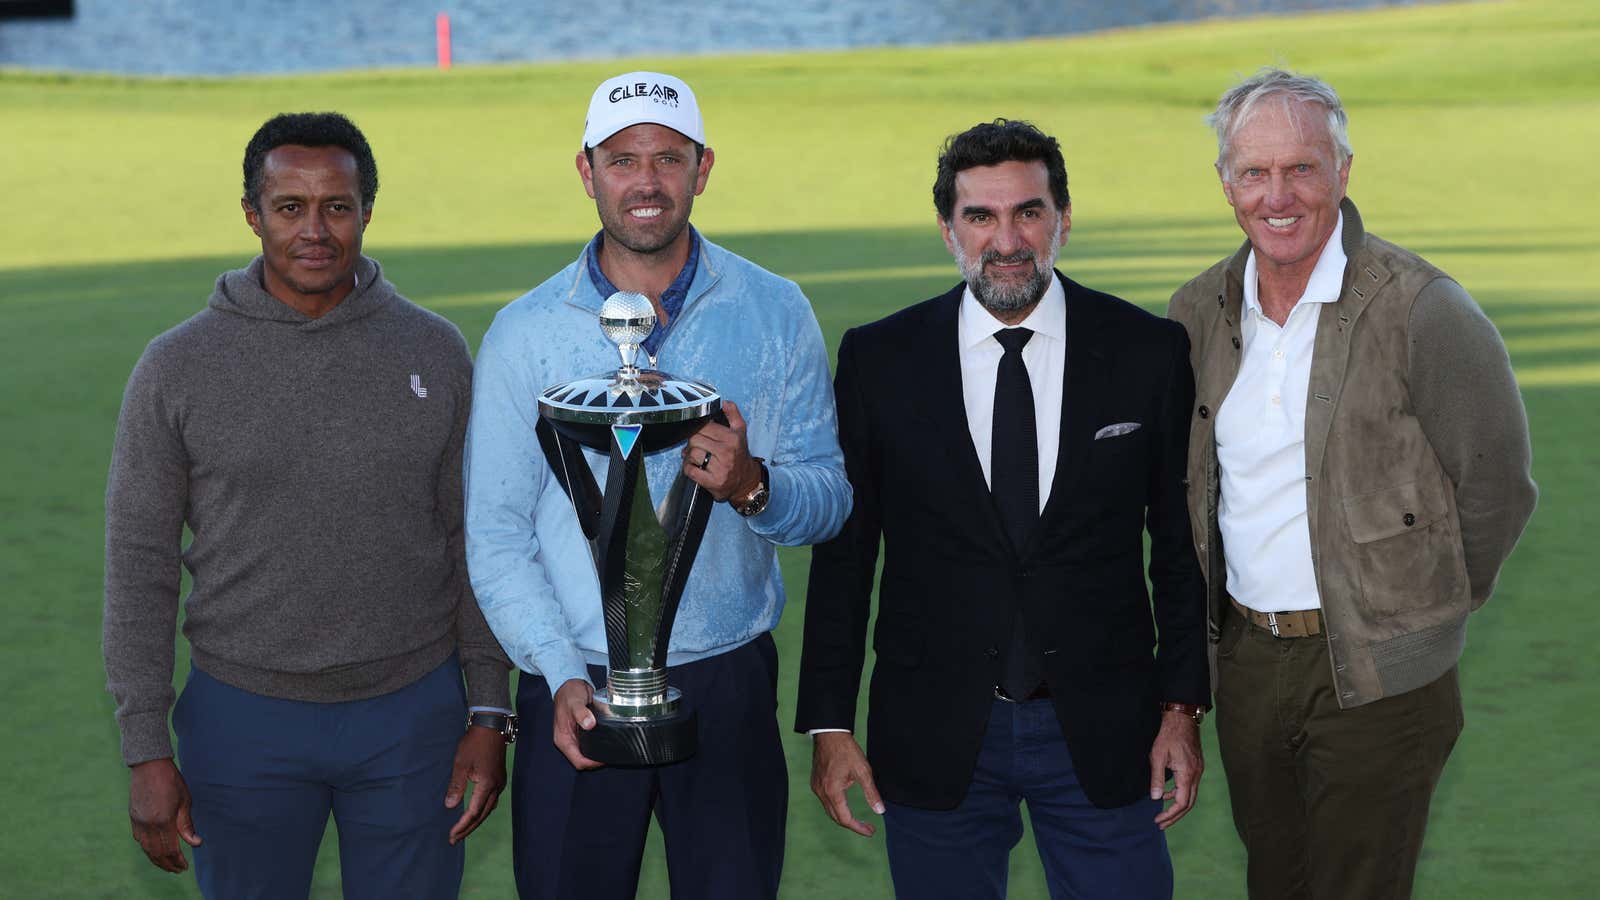 Charl Schwartzel poses with the chief executive of the Saudi Golf Federation Majed Al Sorour, Saudi Public Investment Fund governor Yasir Al-Rumayyan, and Chief executive of LIV Golf Investments Greg Norman after winning the inaugural LIV Golf Invitational.